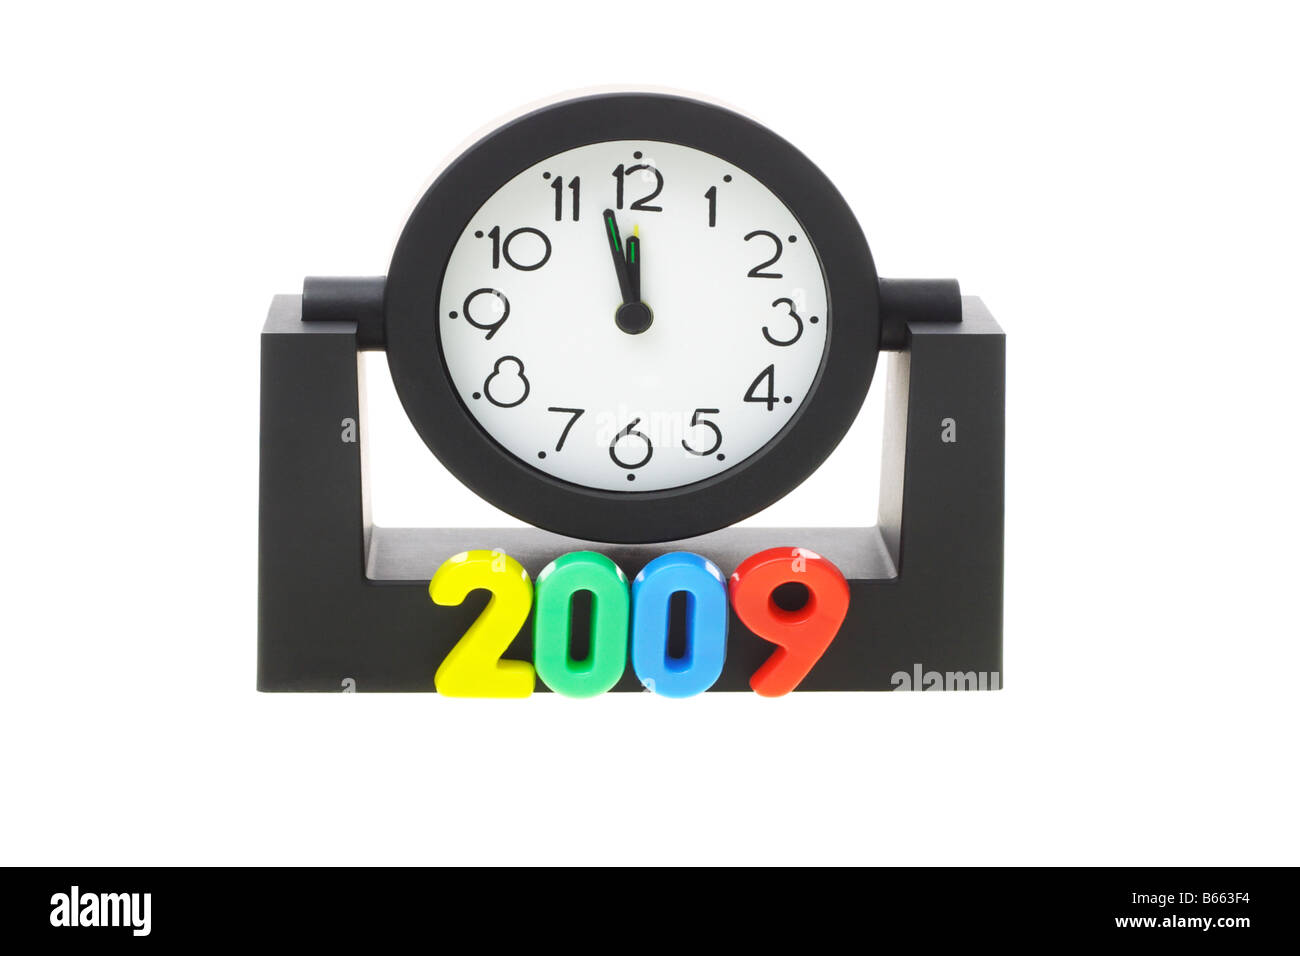 Alarm clock set to 12 mid night to welcome 2009 Stock Photo